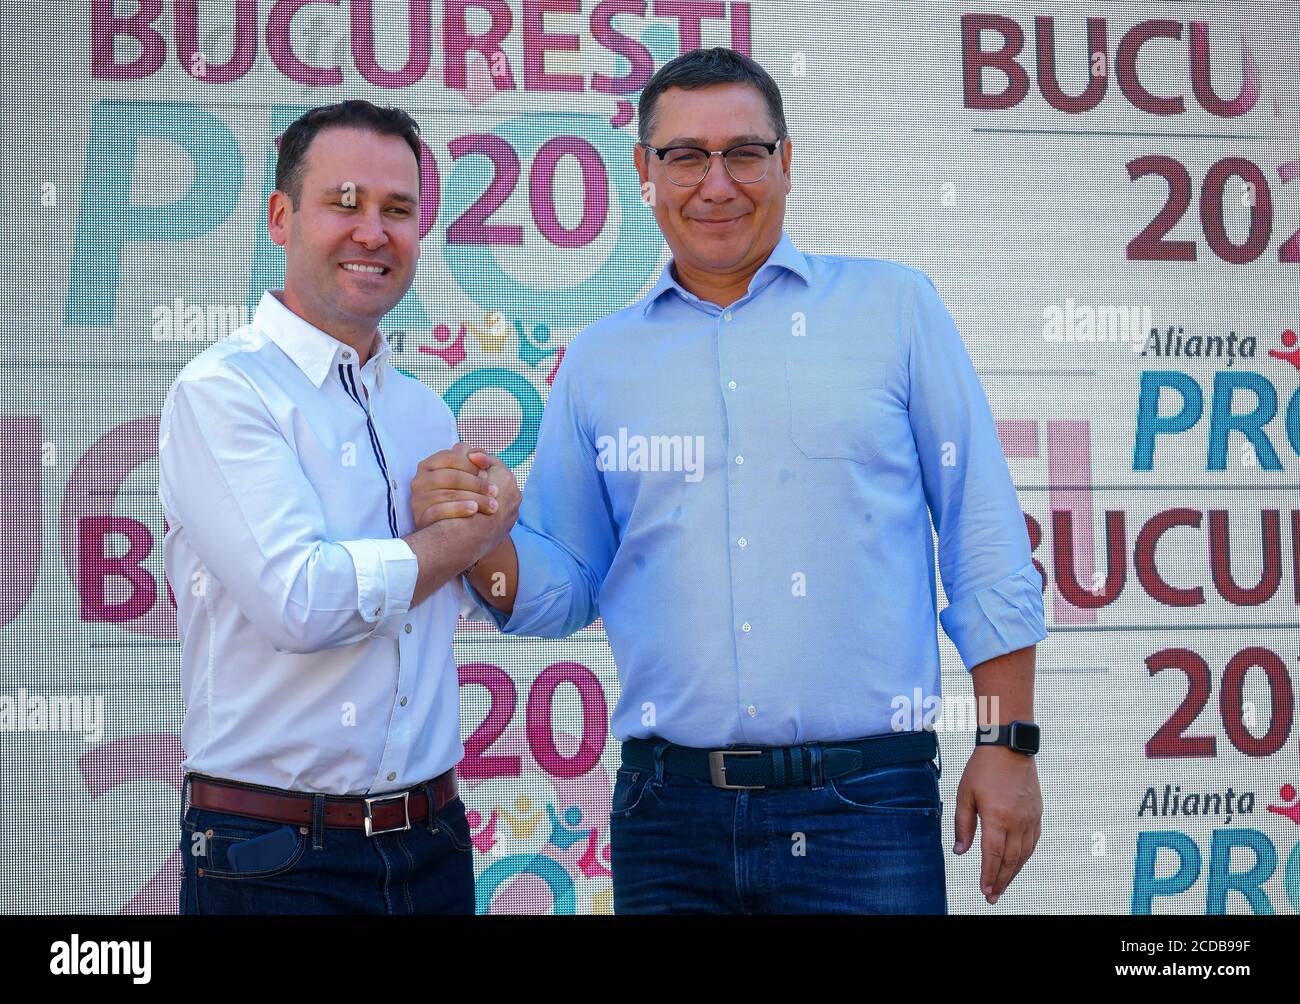 Bucharest, Romania - July 26, 2020: Robert Negoita, candidate for general mayor of Bucharest, and Victor Ponta celebrate the founding of the 'Alianta Stock Photo